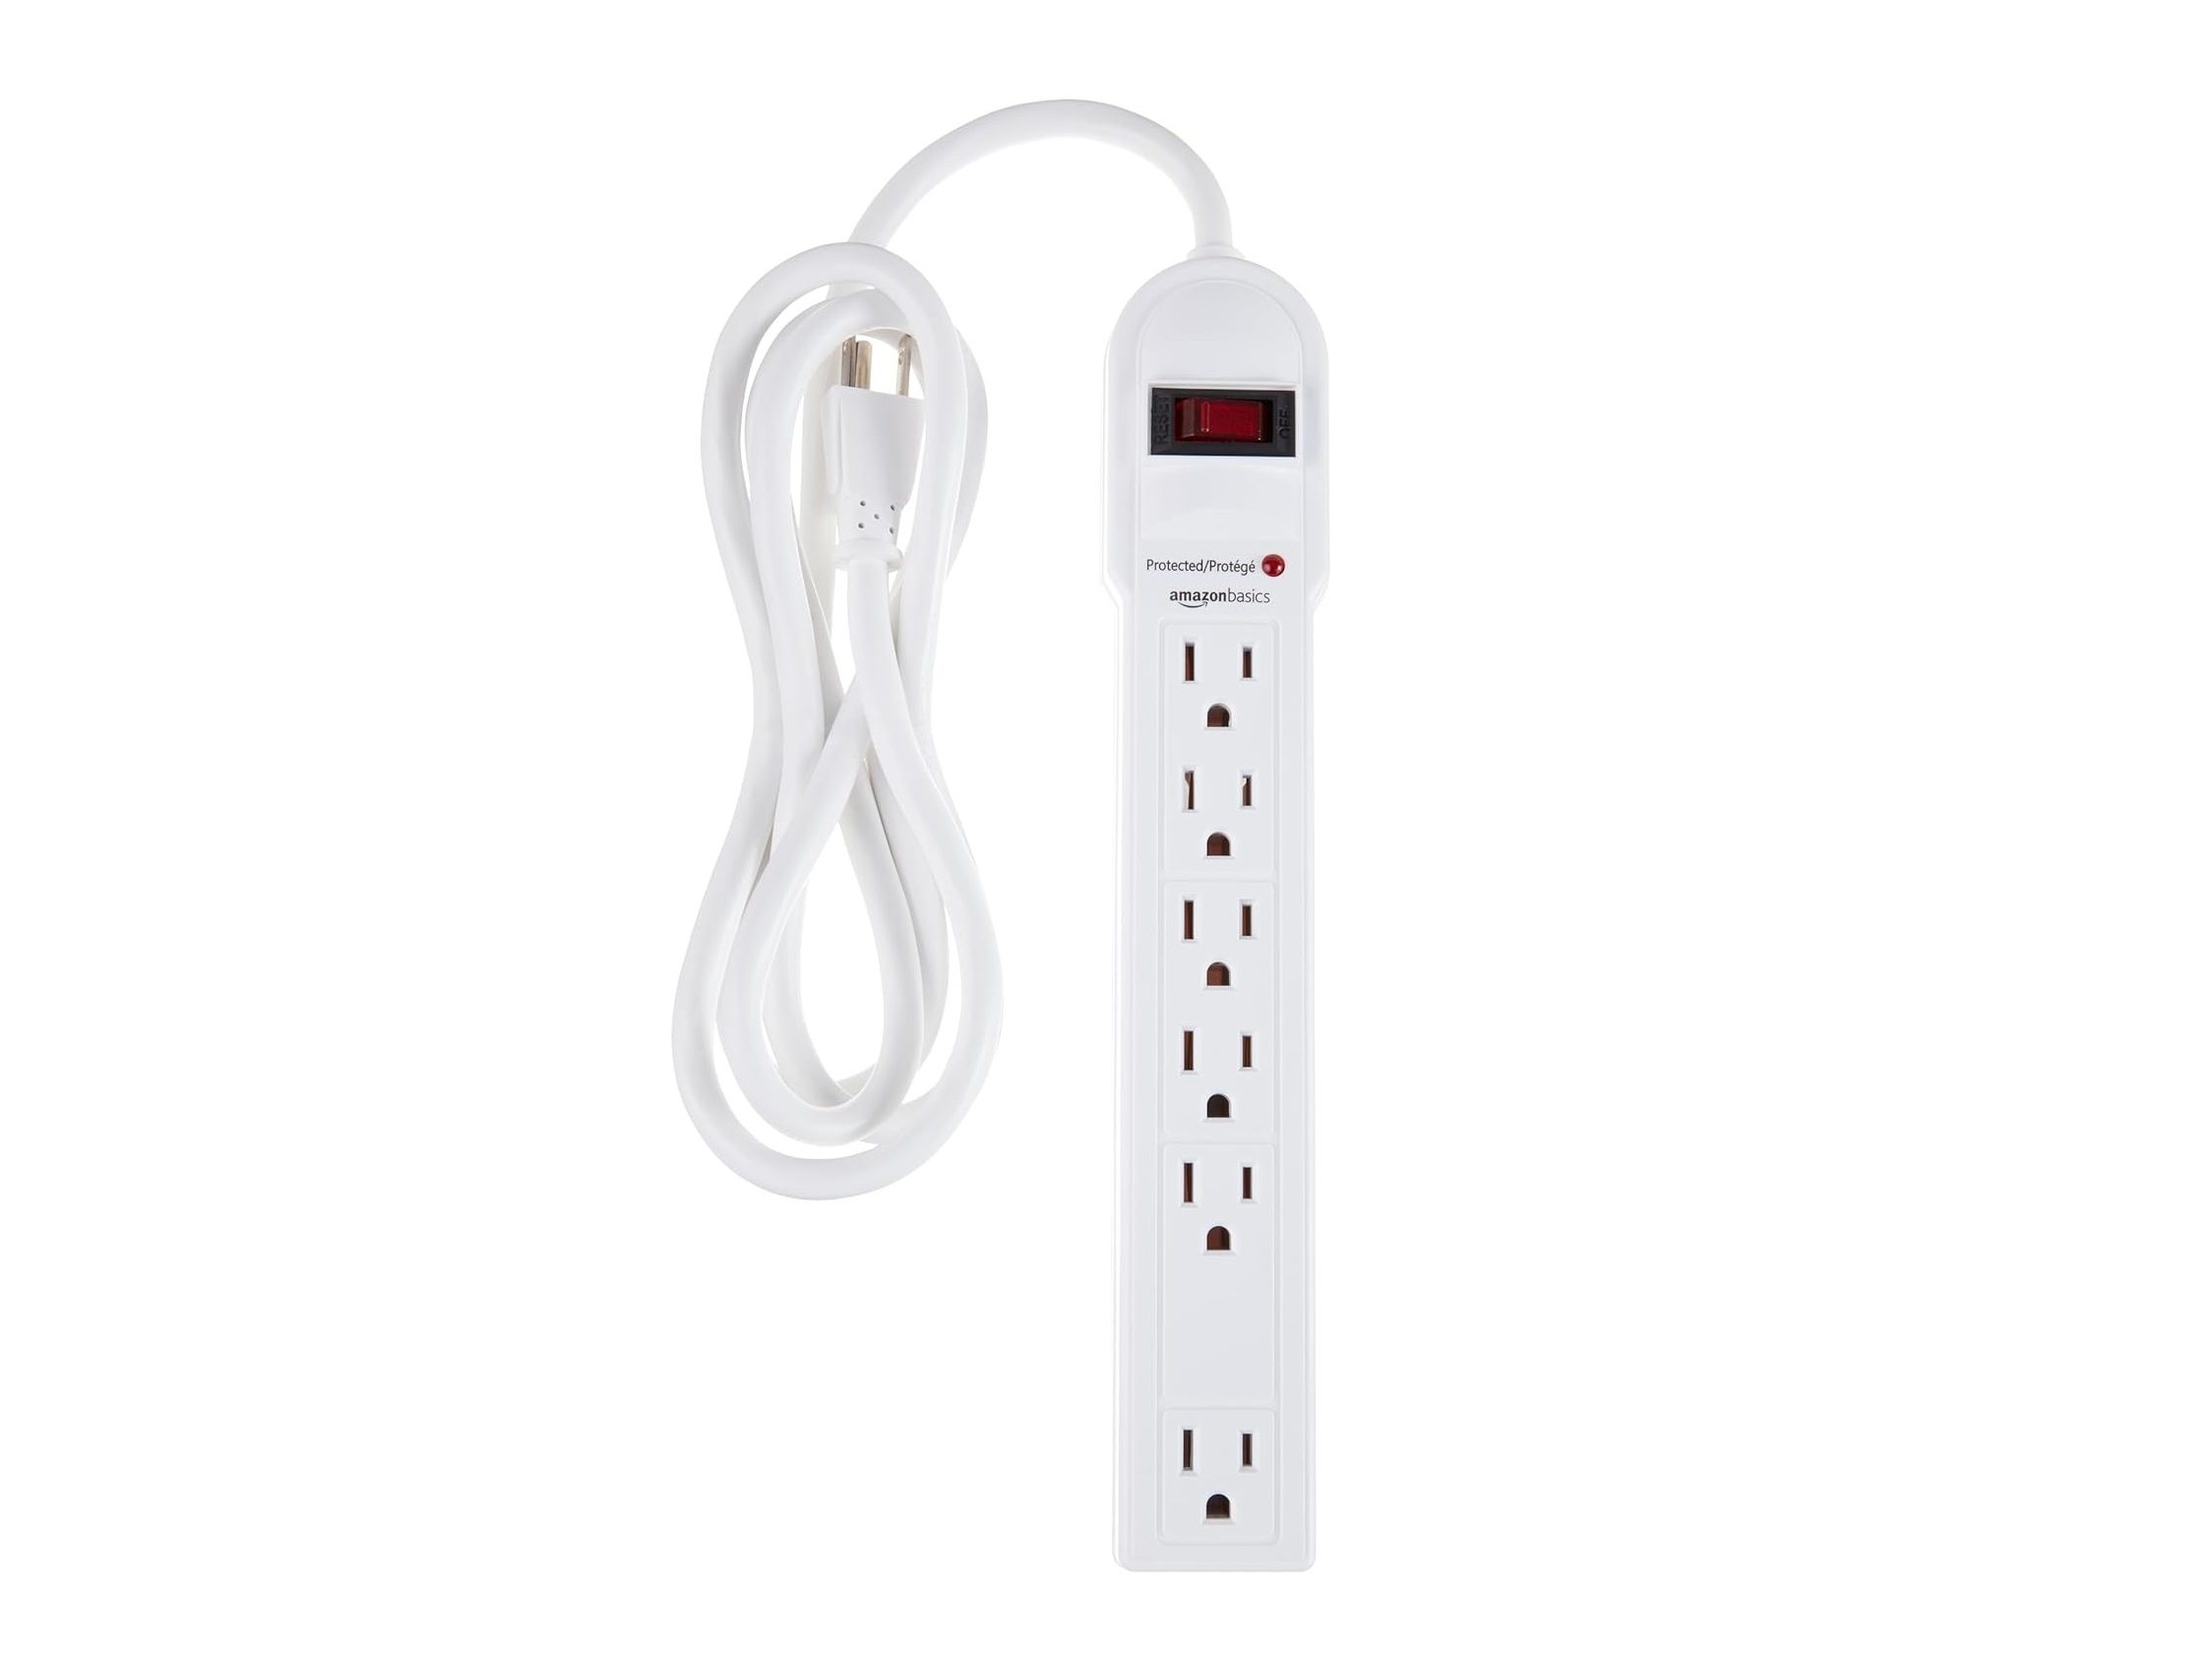 The Best October Prime Day Power Strip Deals Happening Today